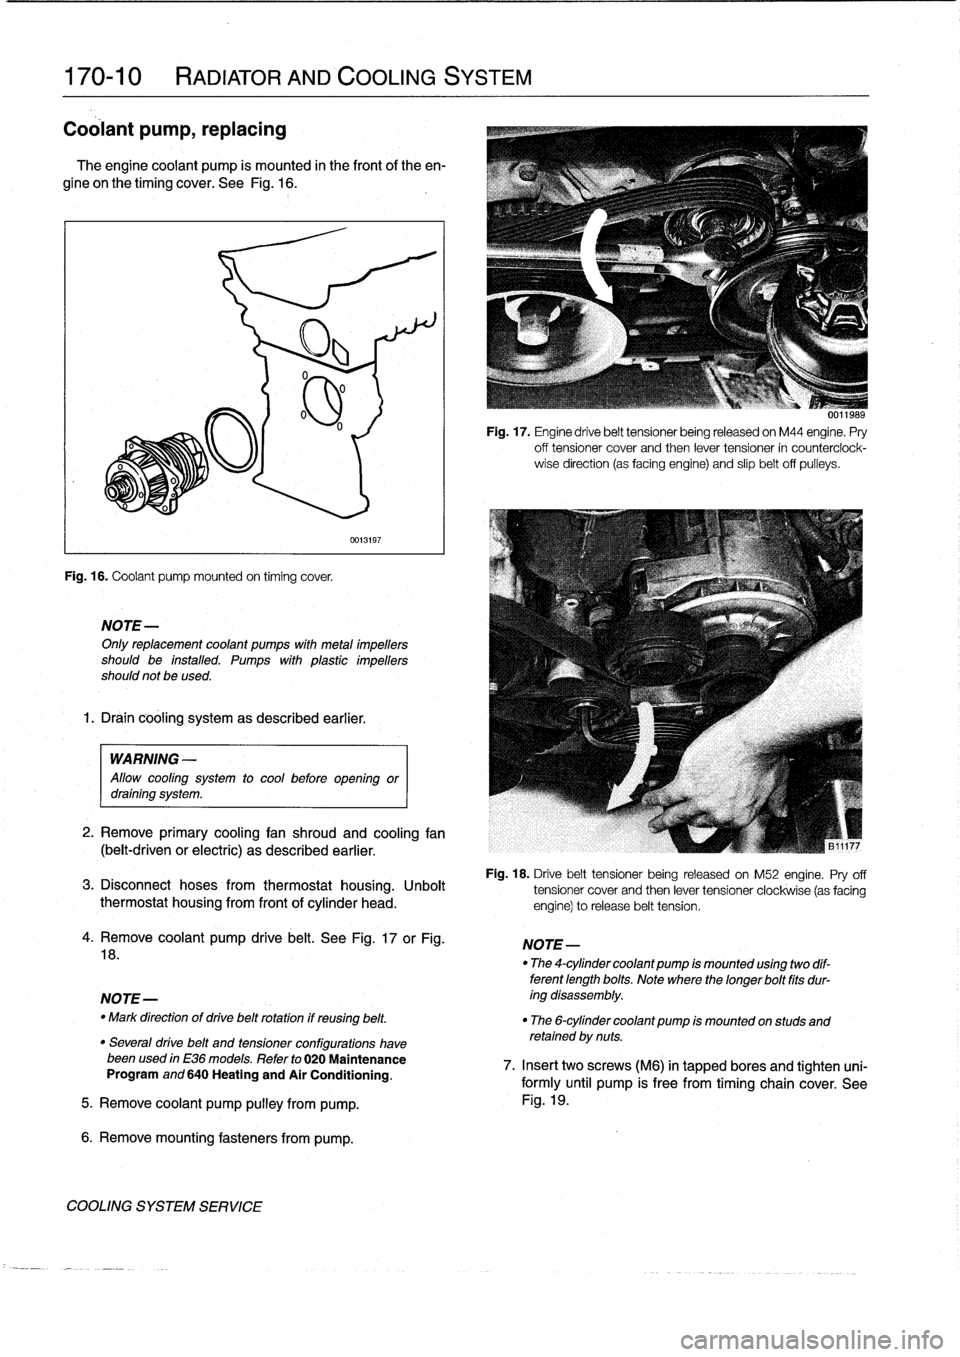 BMW 328i 1995 E36 Workshop Manual 
170-10

	

RADIATOR
AND
COOLING
SYSTEM

Coolant
pump,
replacing

The
engine
coolant
pump
is
mounted
in
the
frontof
the
en-

gine
on
the
timing
cover
.
See
Fig
.
16
.

Fig
.
16
.
Coolant
pump
mounted
